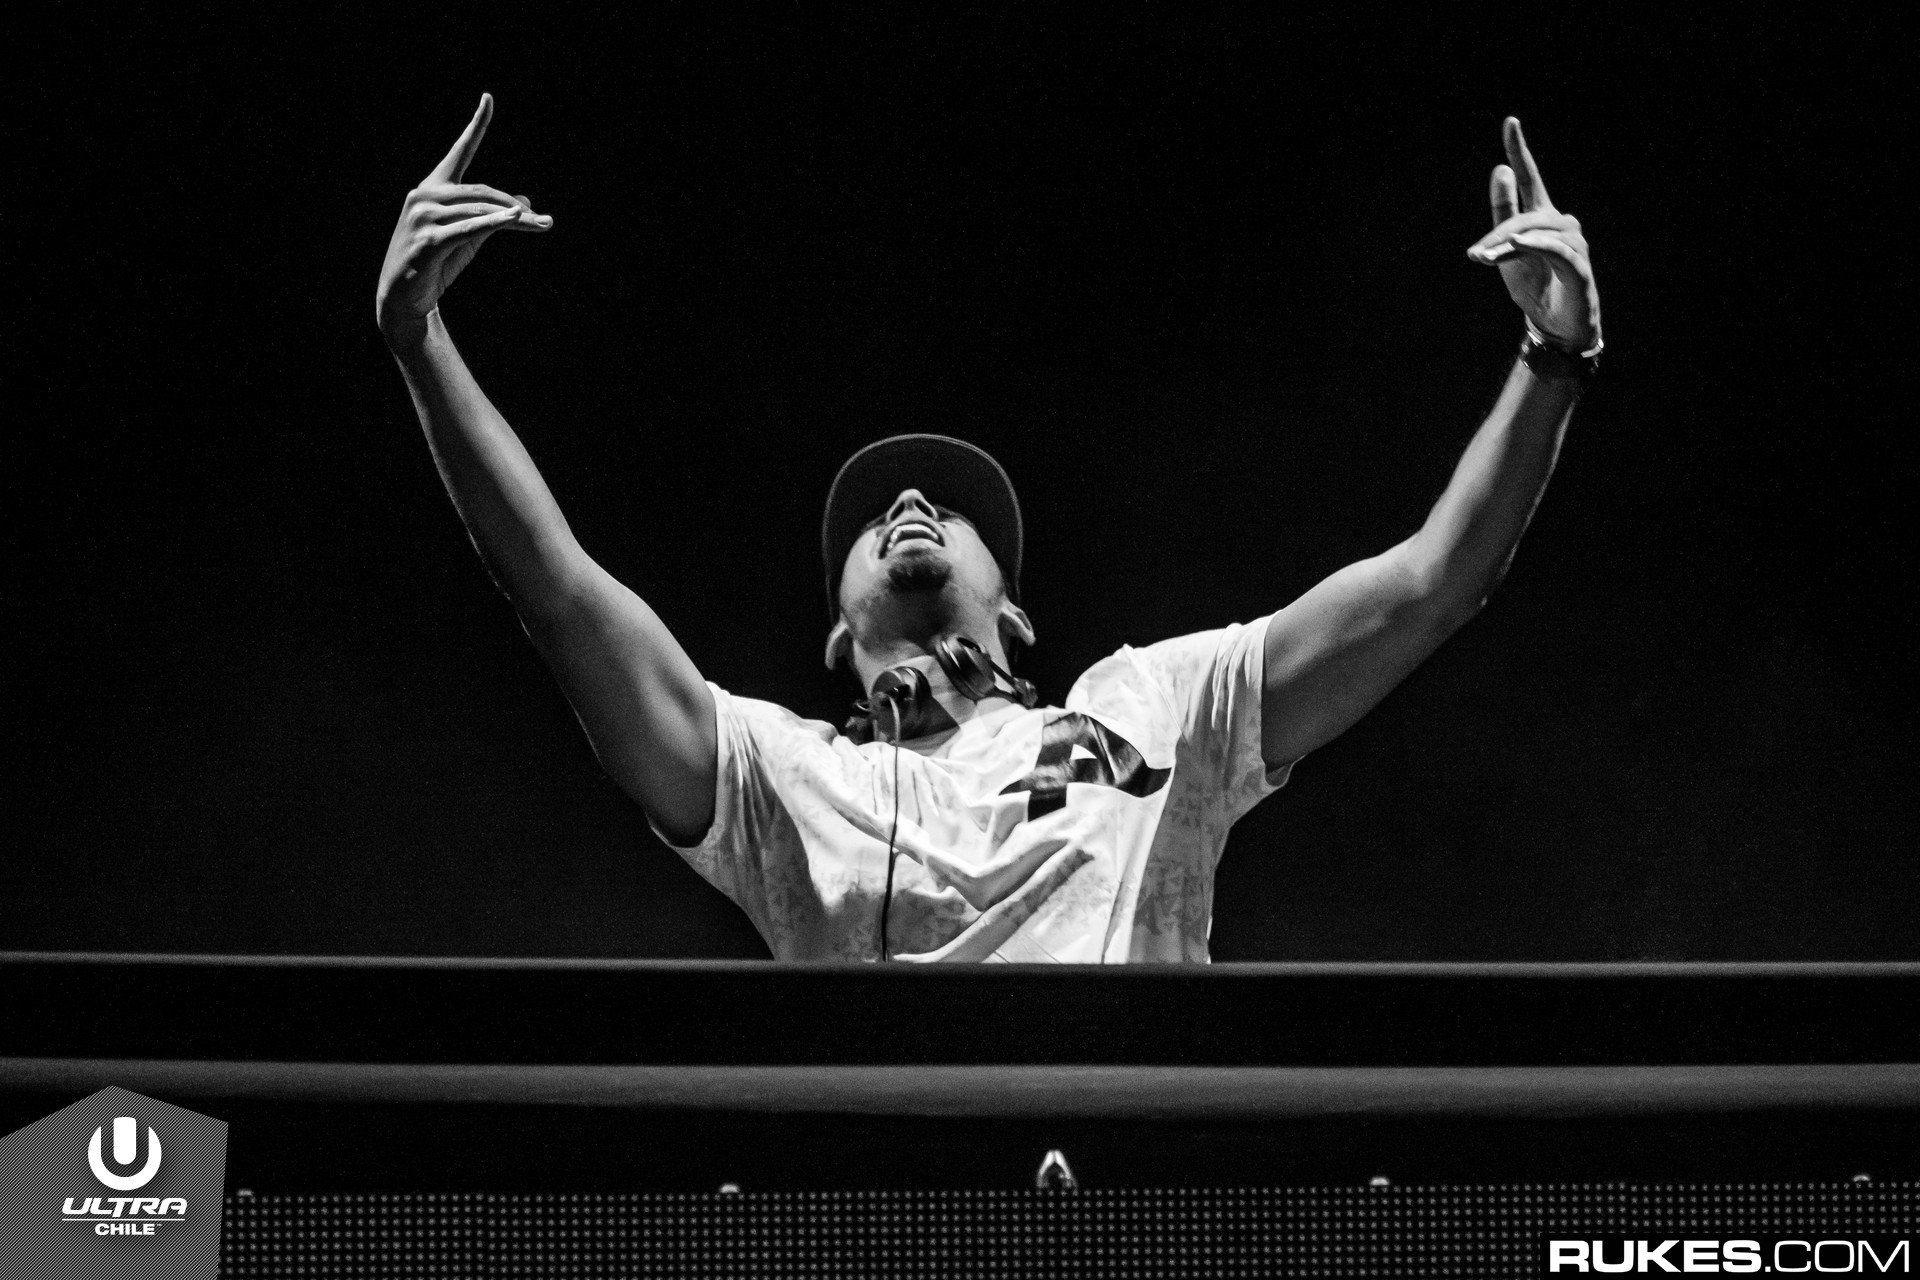 Afrojack and Jay Karama Blast into 2017 with an Exciting Trap